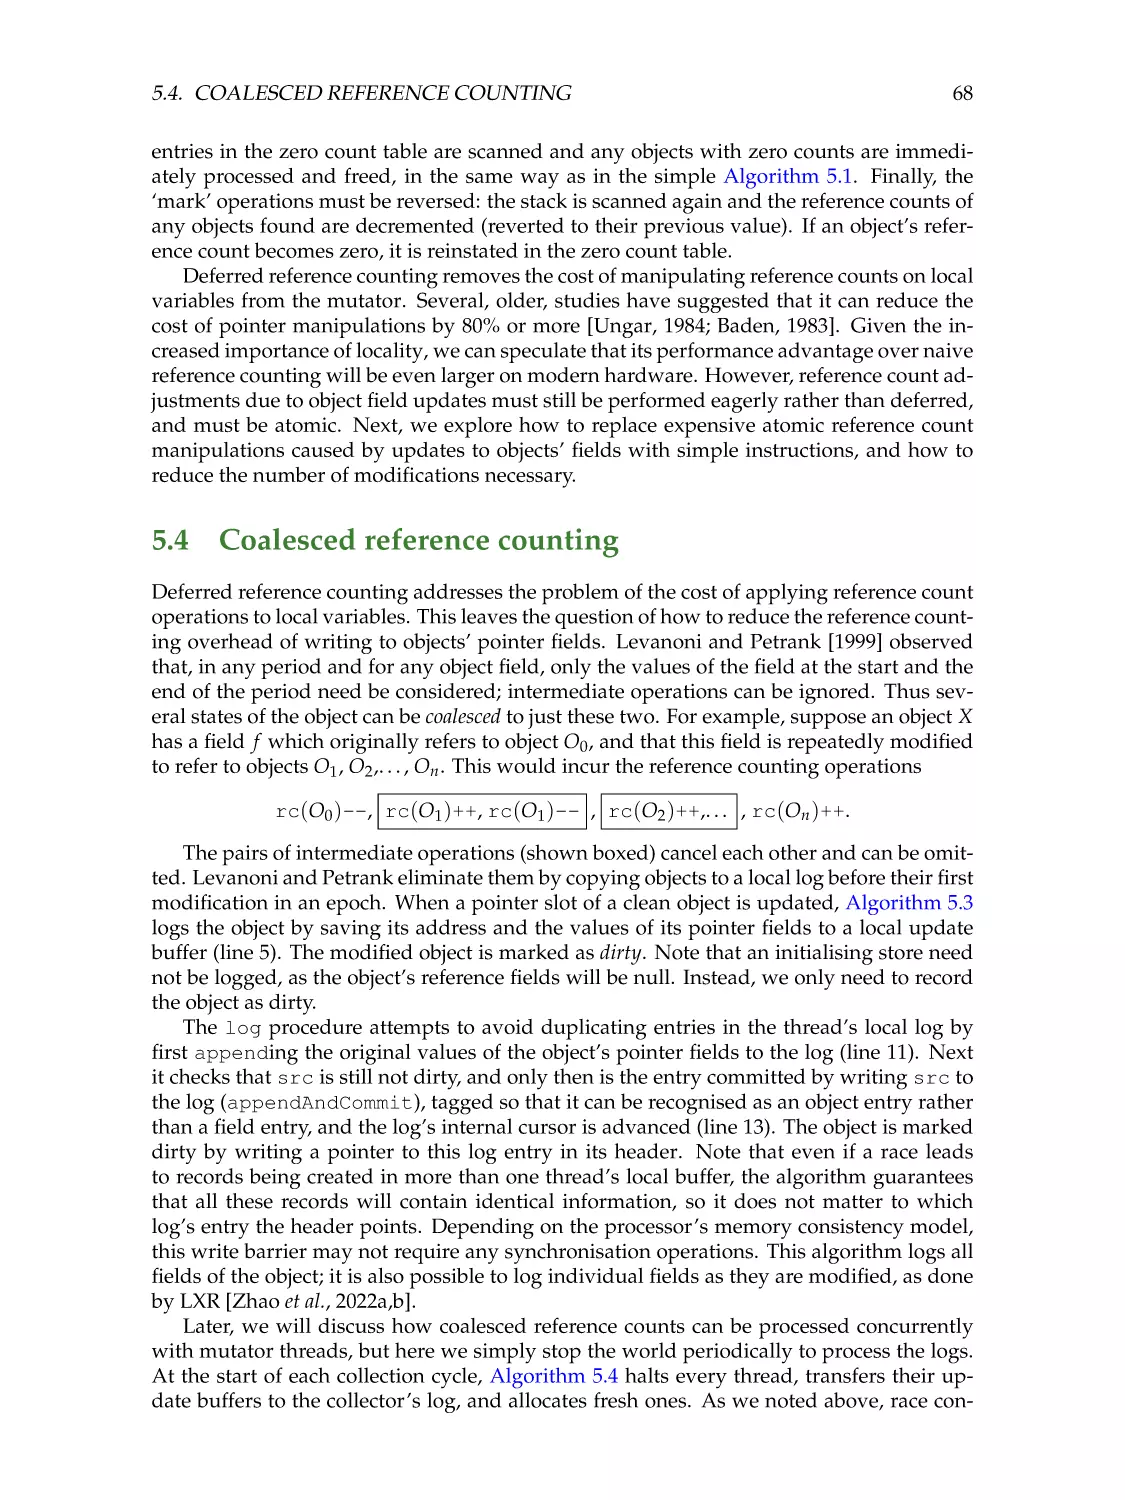 5.4. Coalesced reference counting